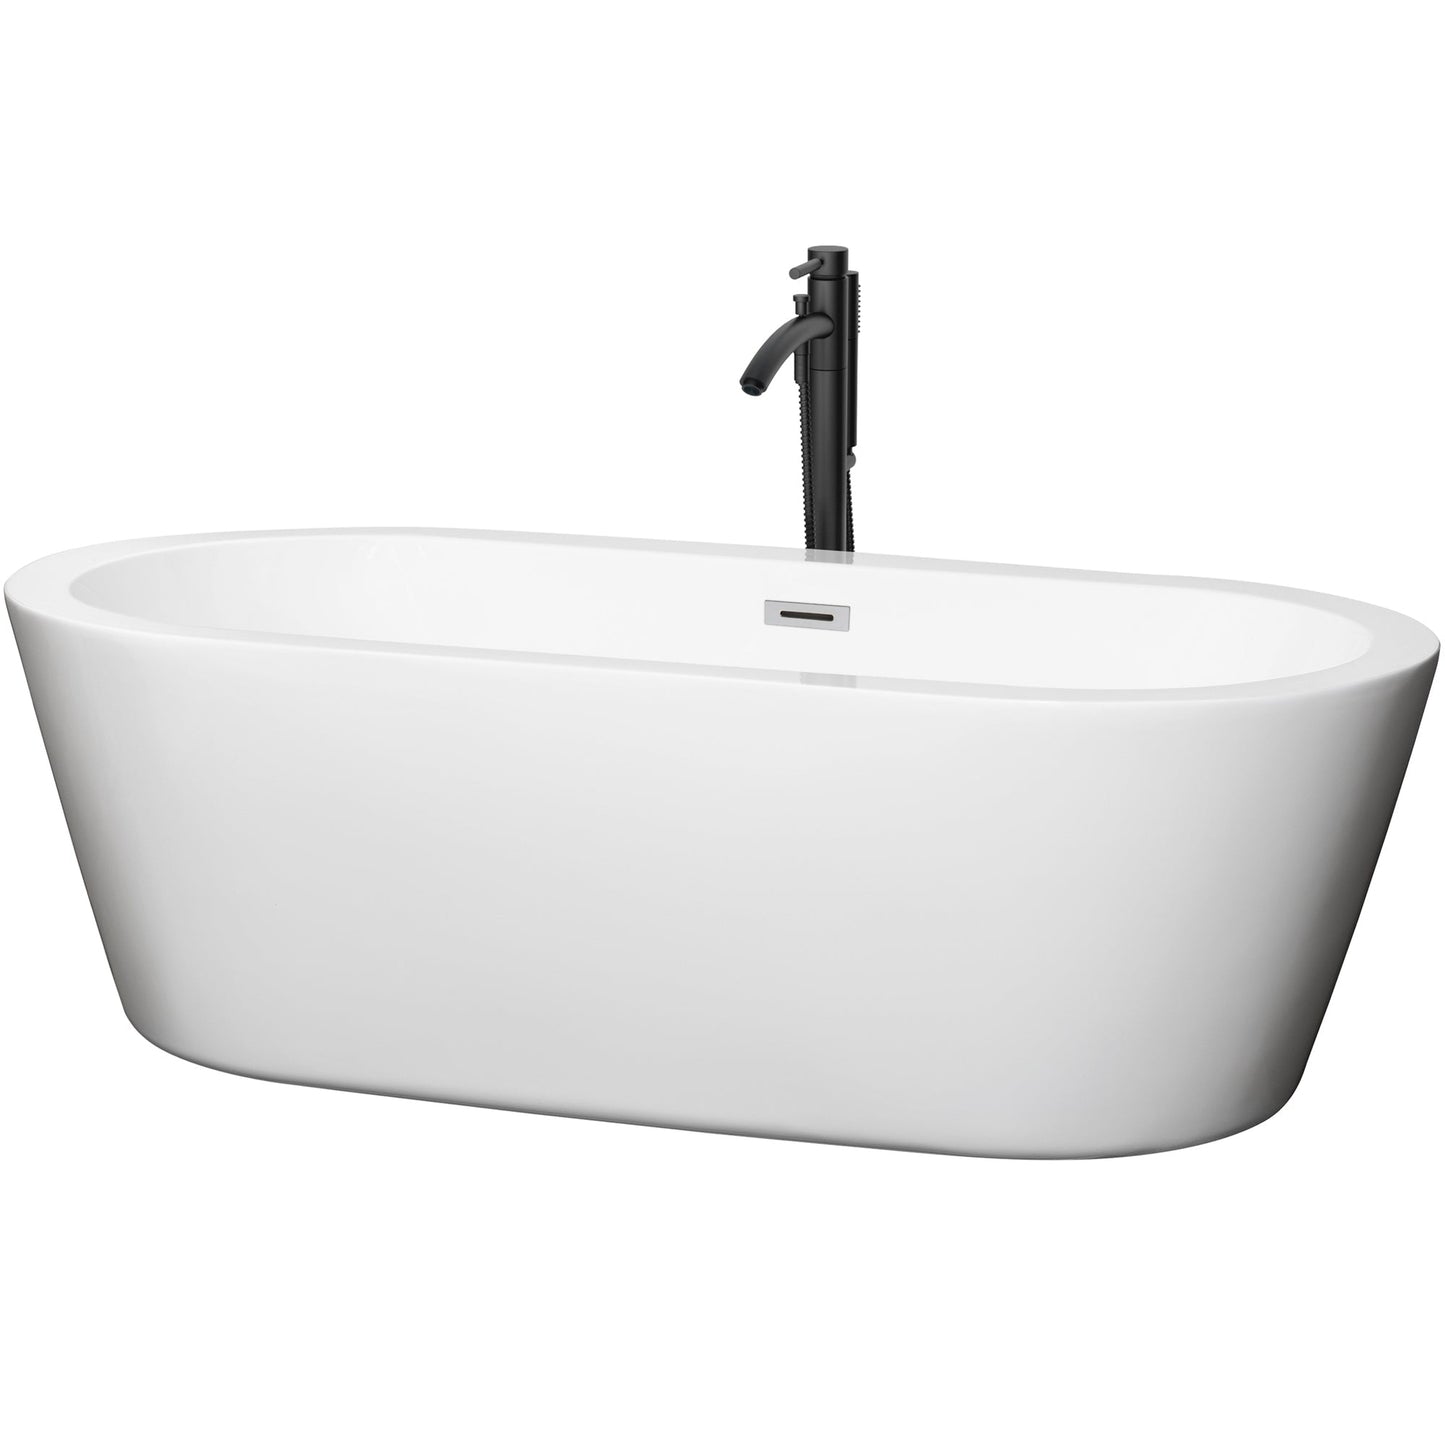 Wyndham Collection Mermaid 71" Freestanding Bathtub in White With Polished Chrome Trim and Floor Mounted Faucet in Matte Black